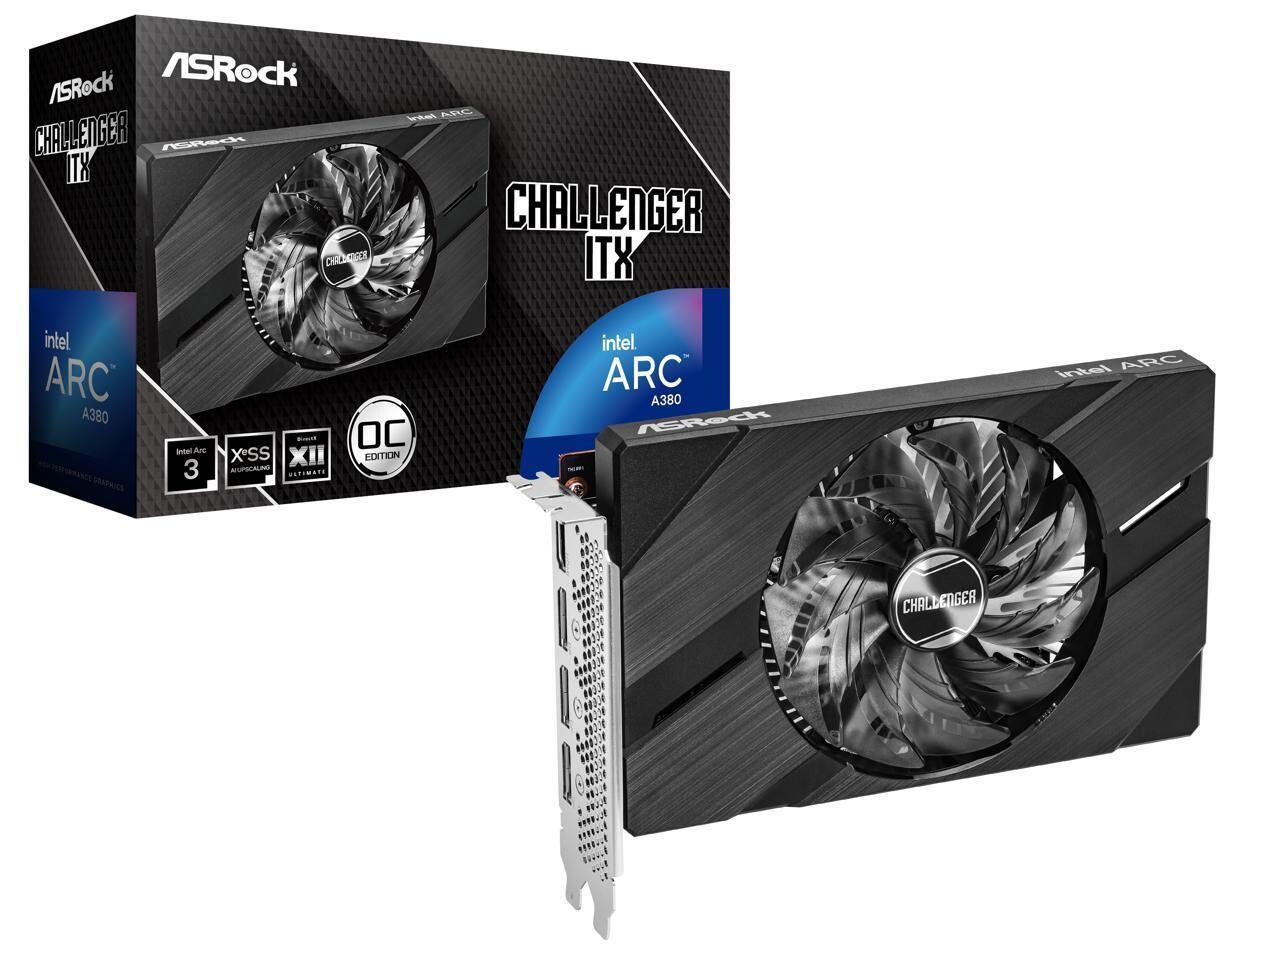 ASRock Cuts Prices on ARC Graphics Card, SEA Pricing Still in Limbo - returnal